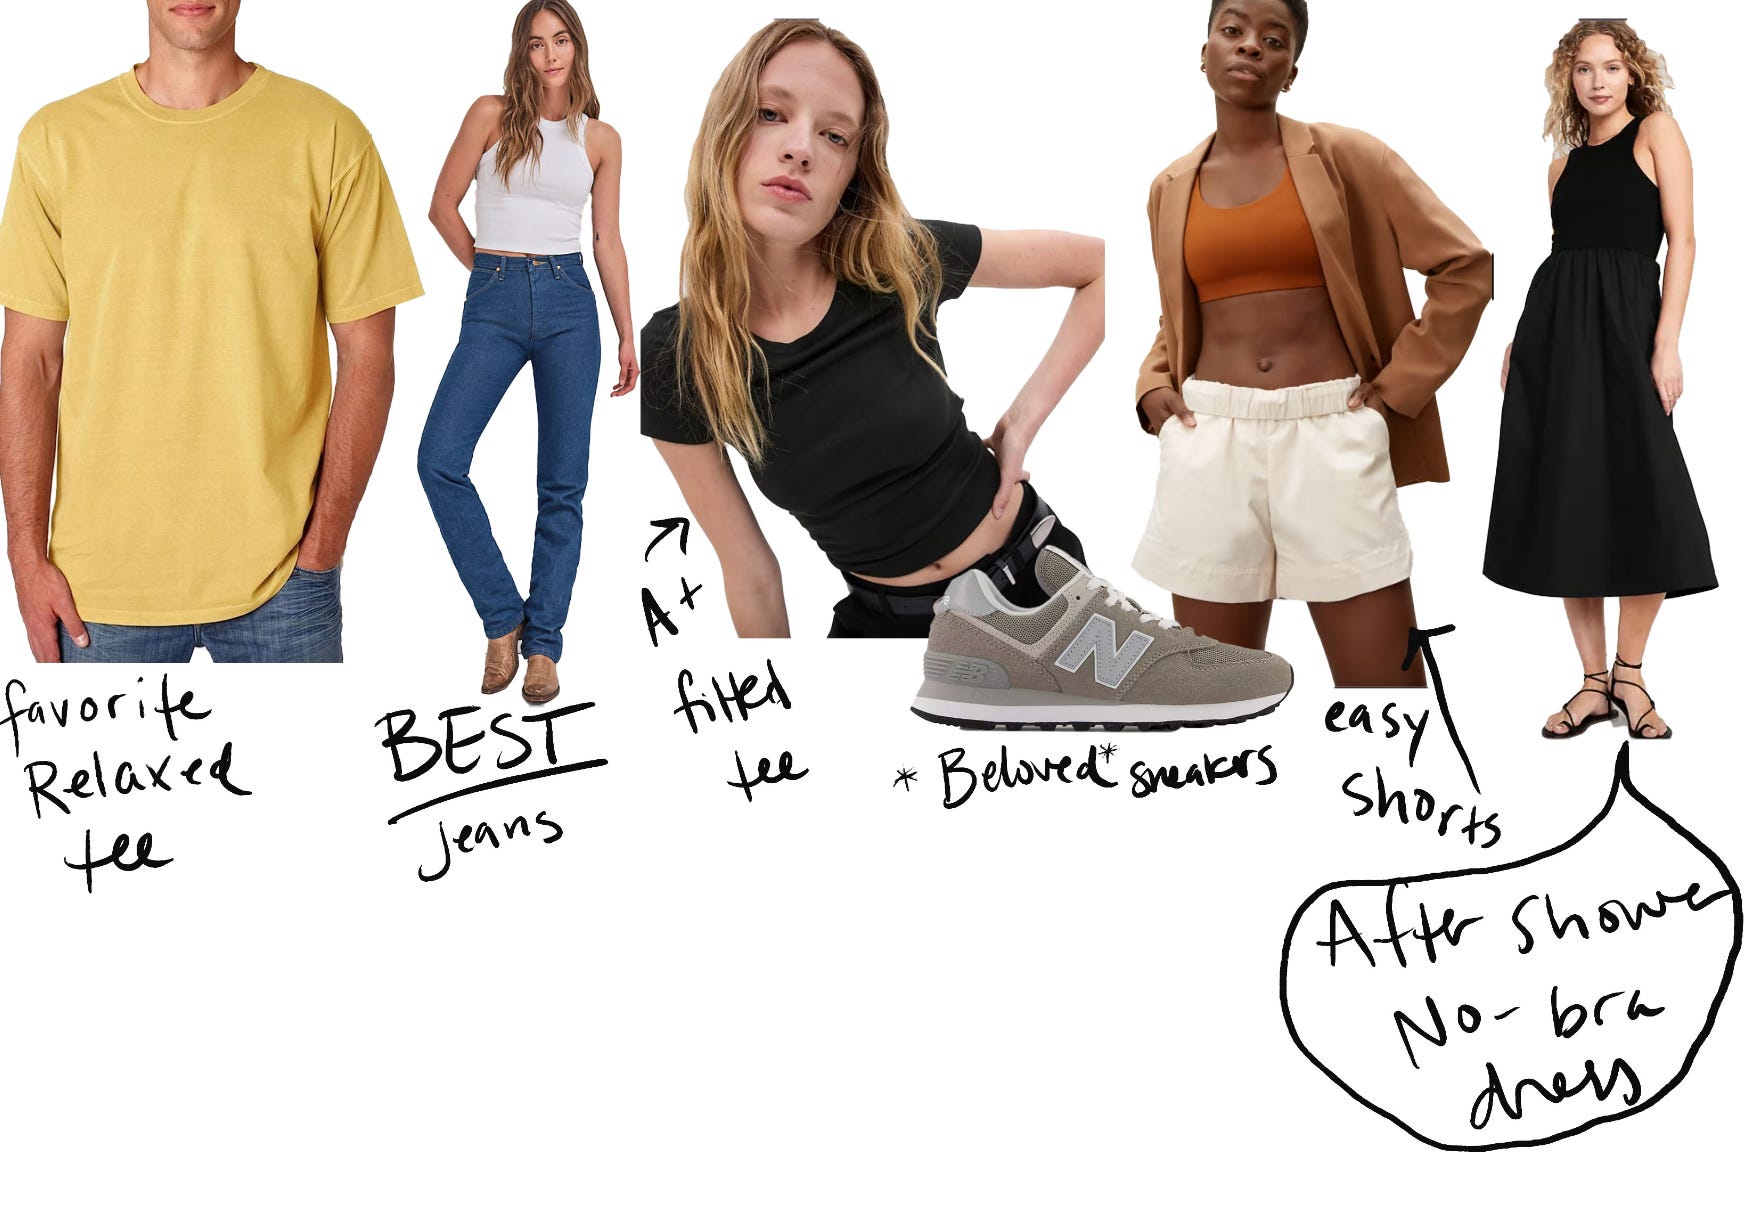 We Tried a Bra: The Everlane Solution for When You Hate Wearing a